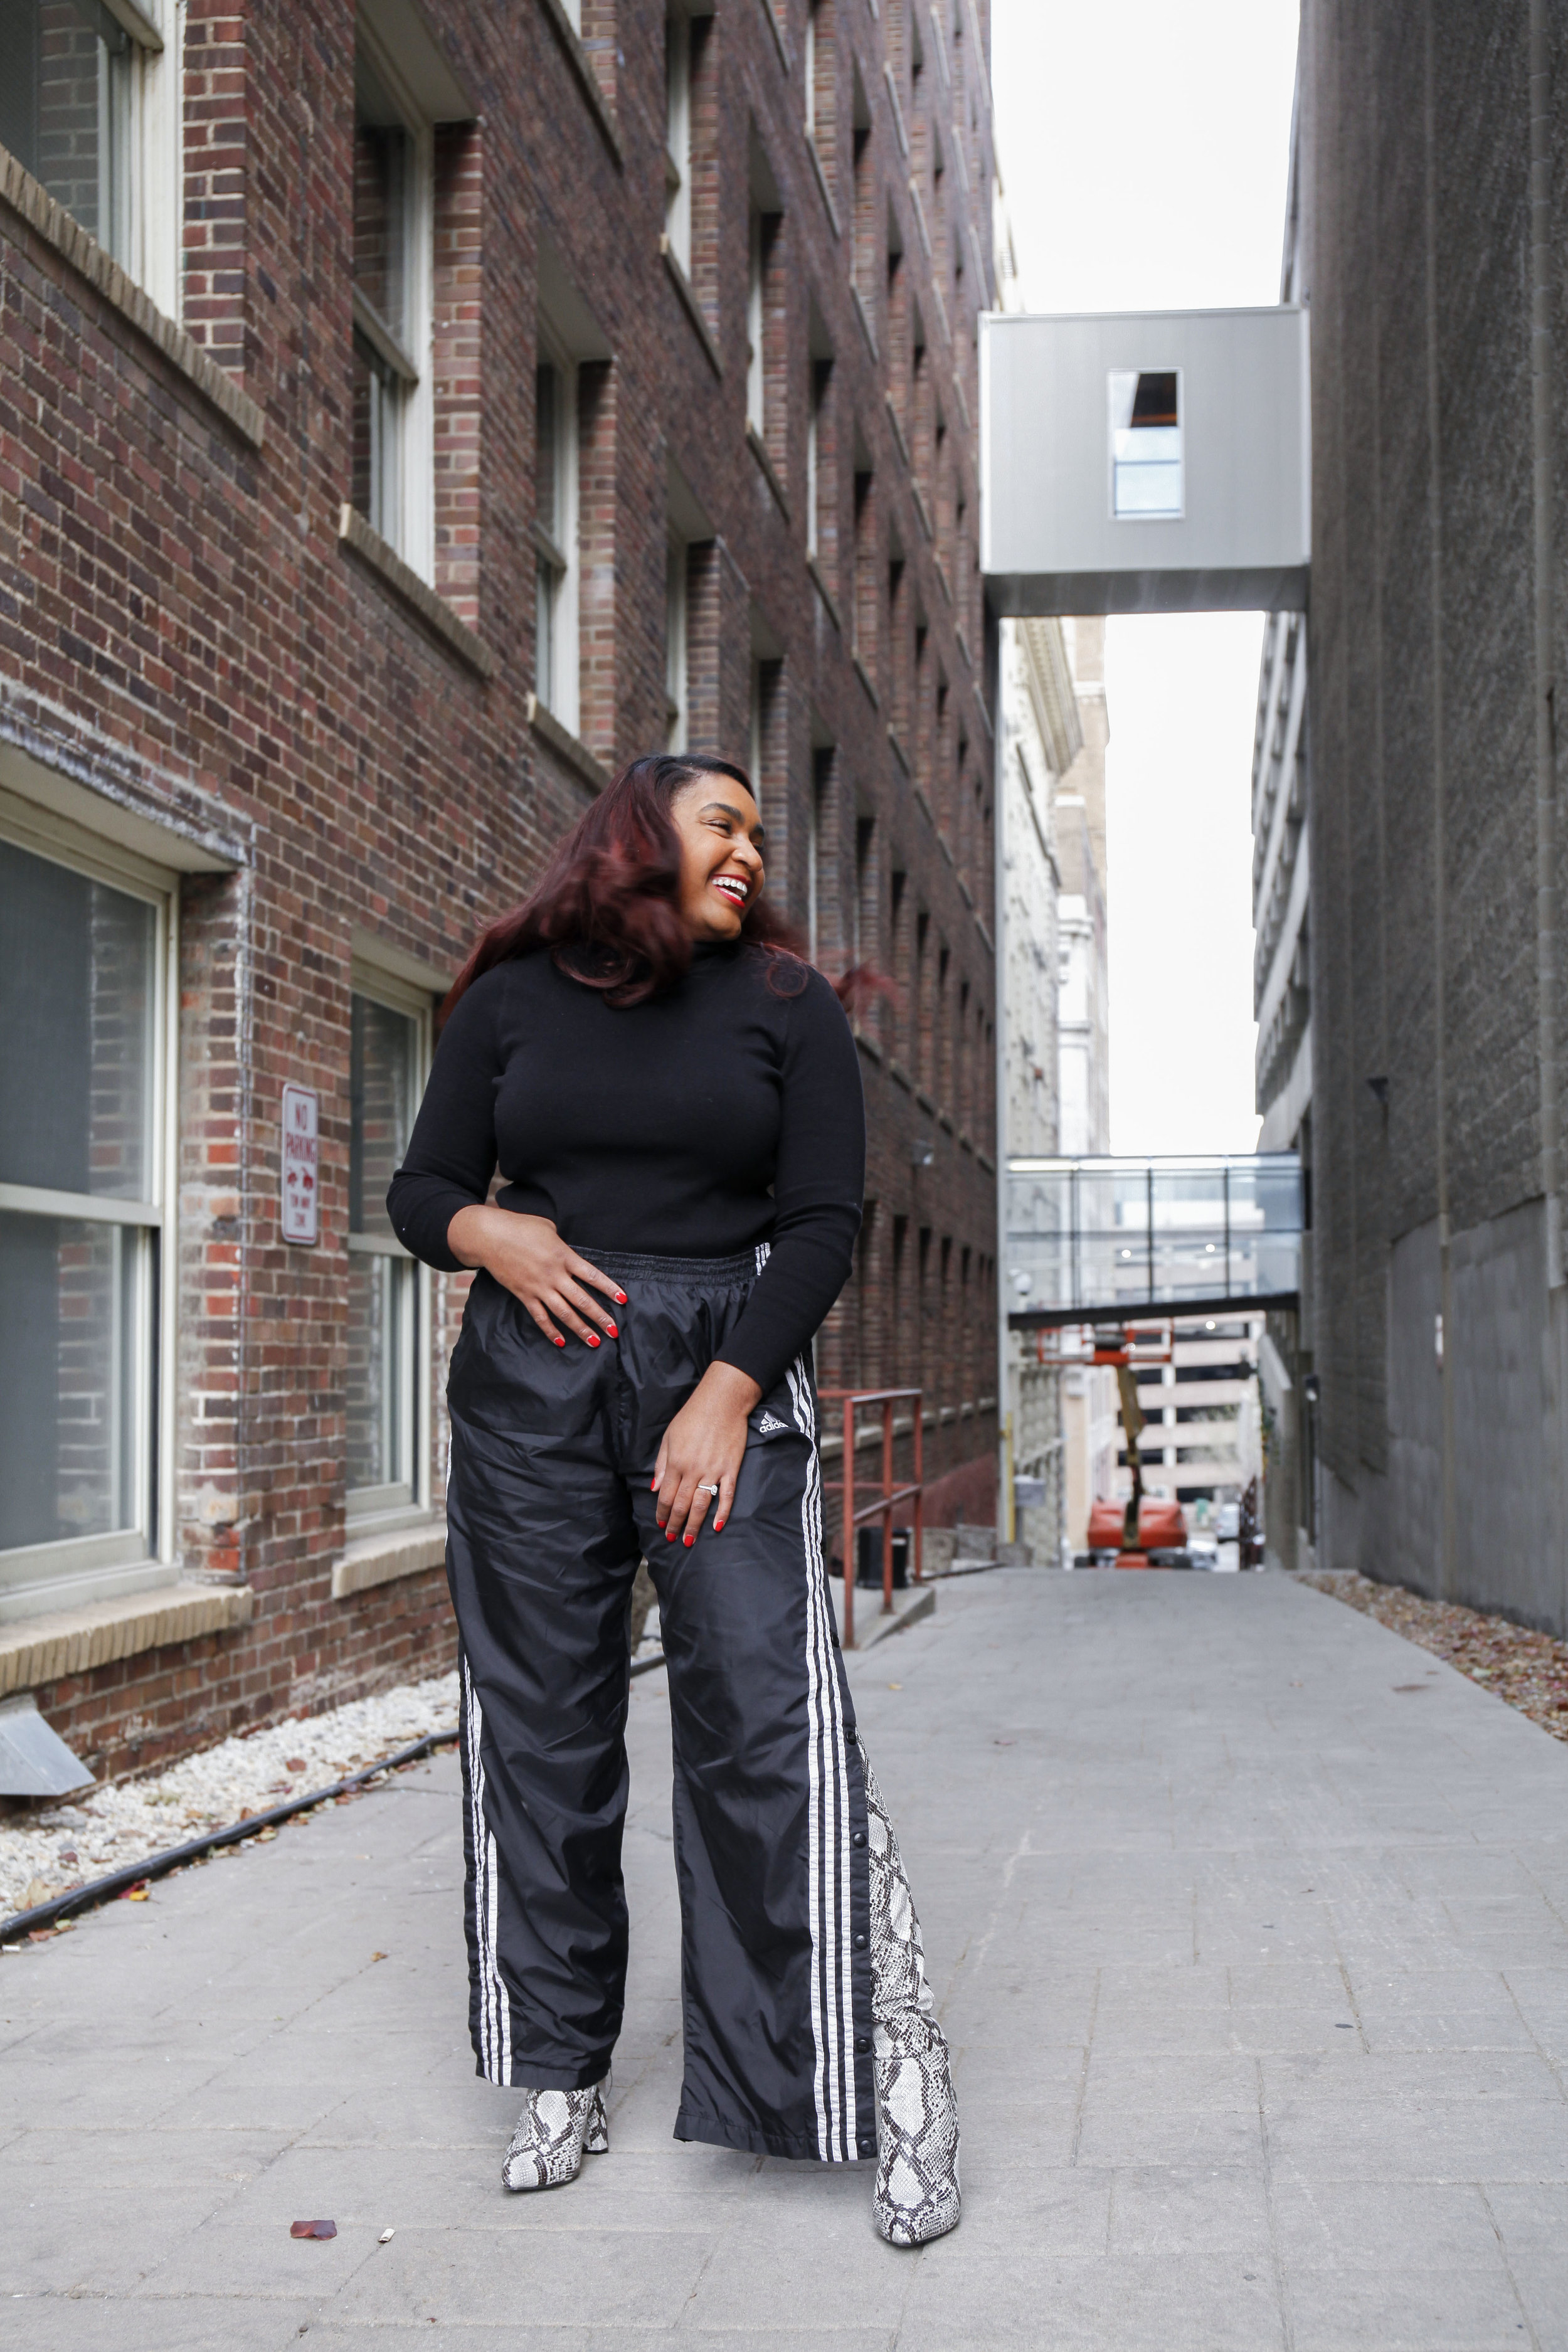 adidas + UO Fitted Track Pant | Adidas pants outfit, Adidas pants, Adidas  track pants